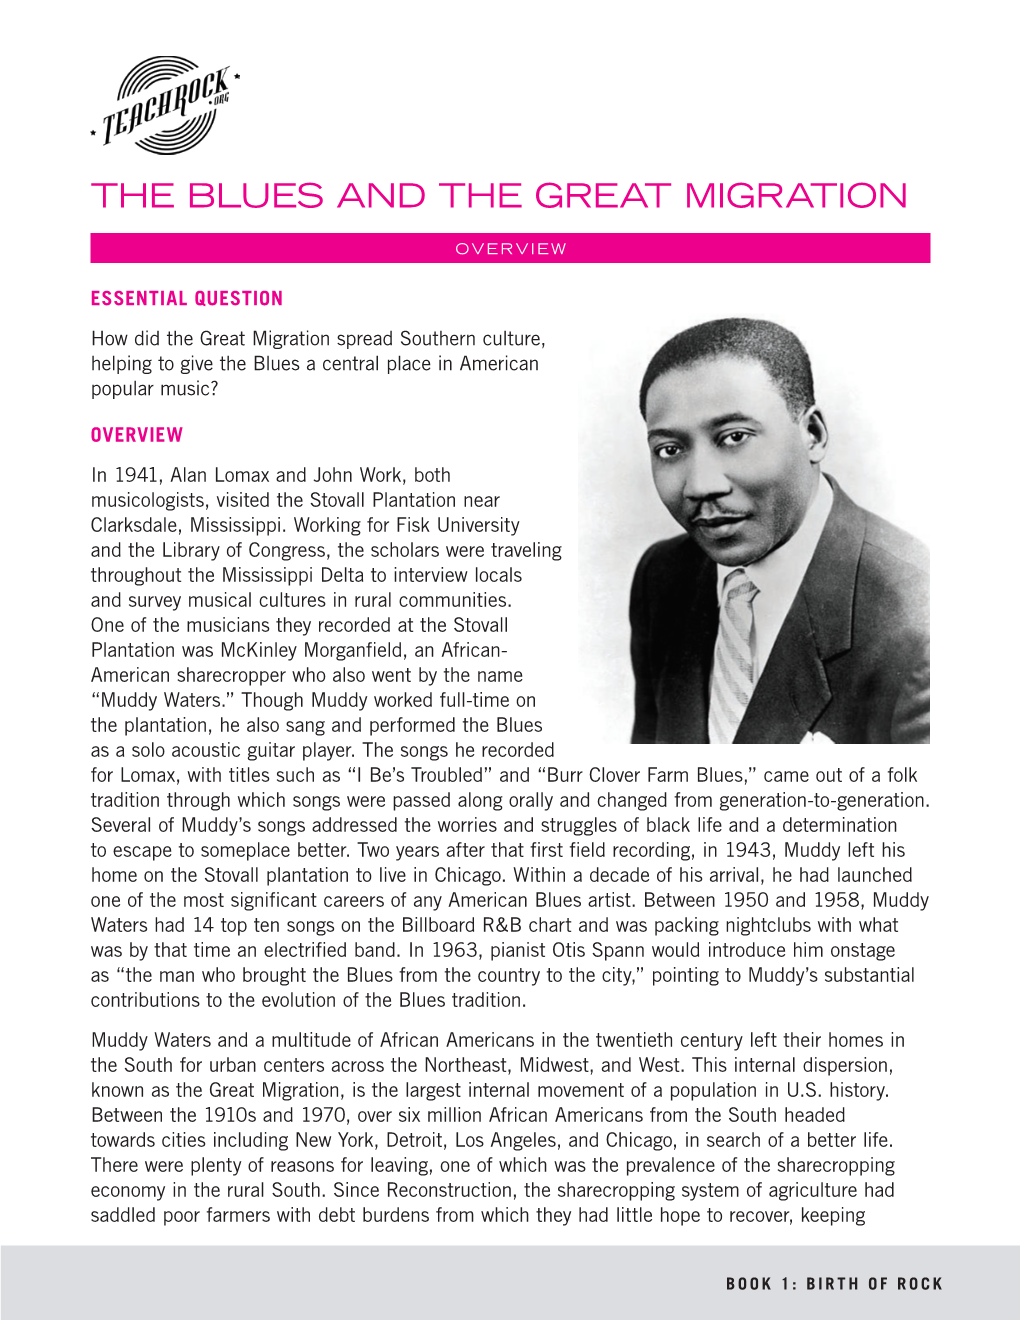 The Blues and the Great Migration